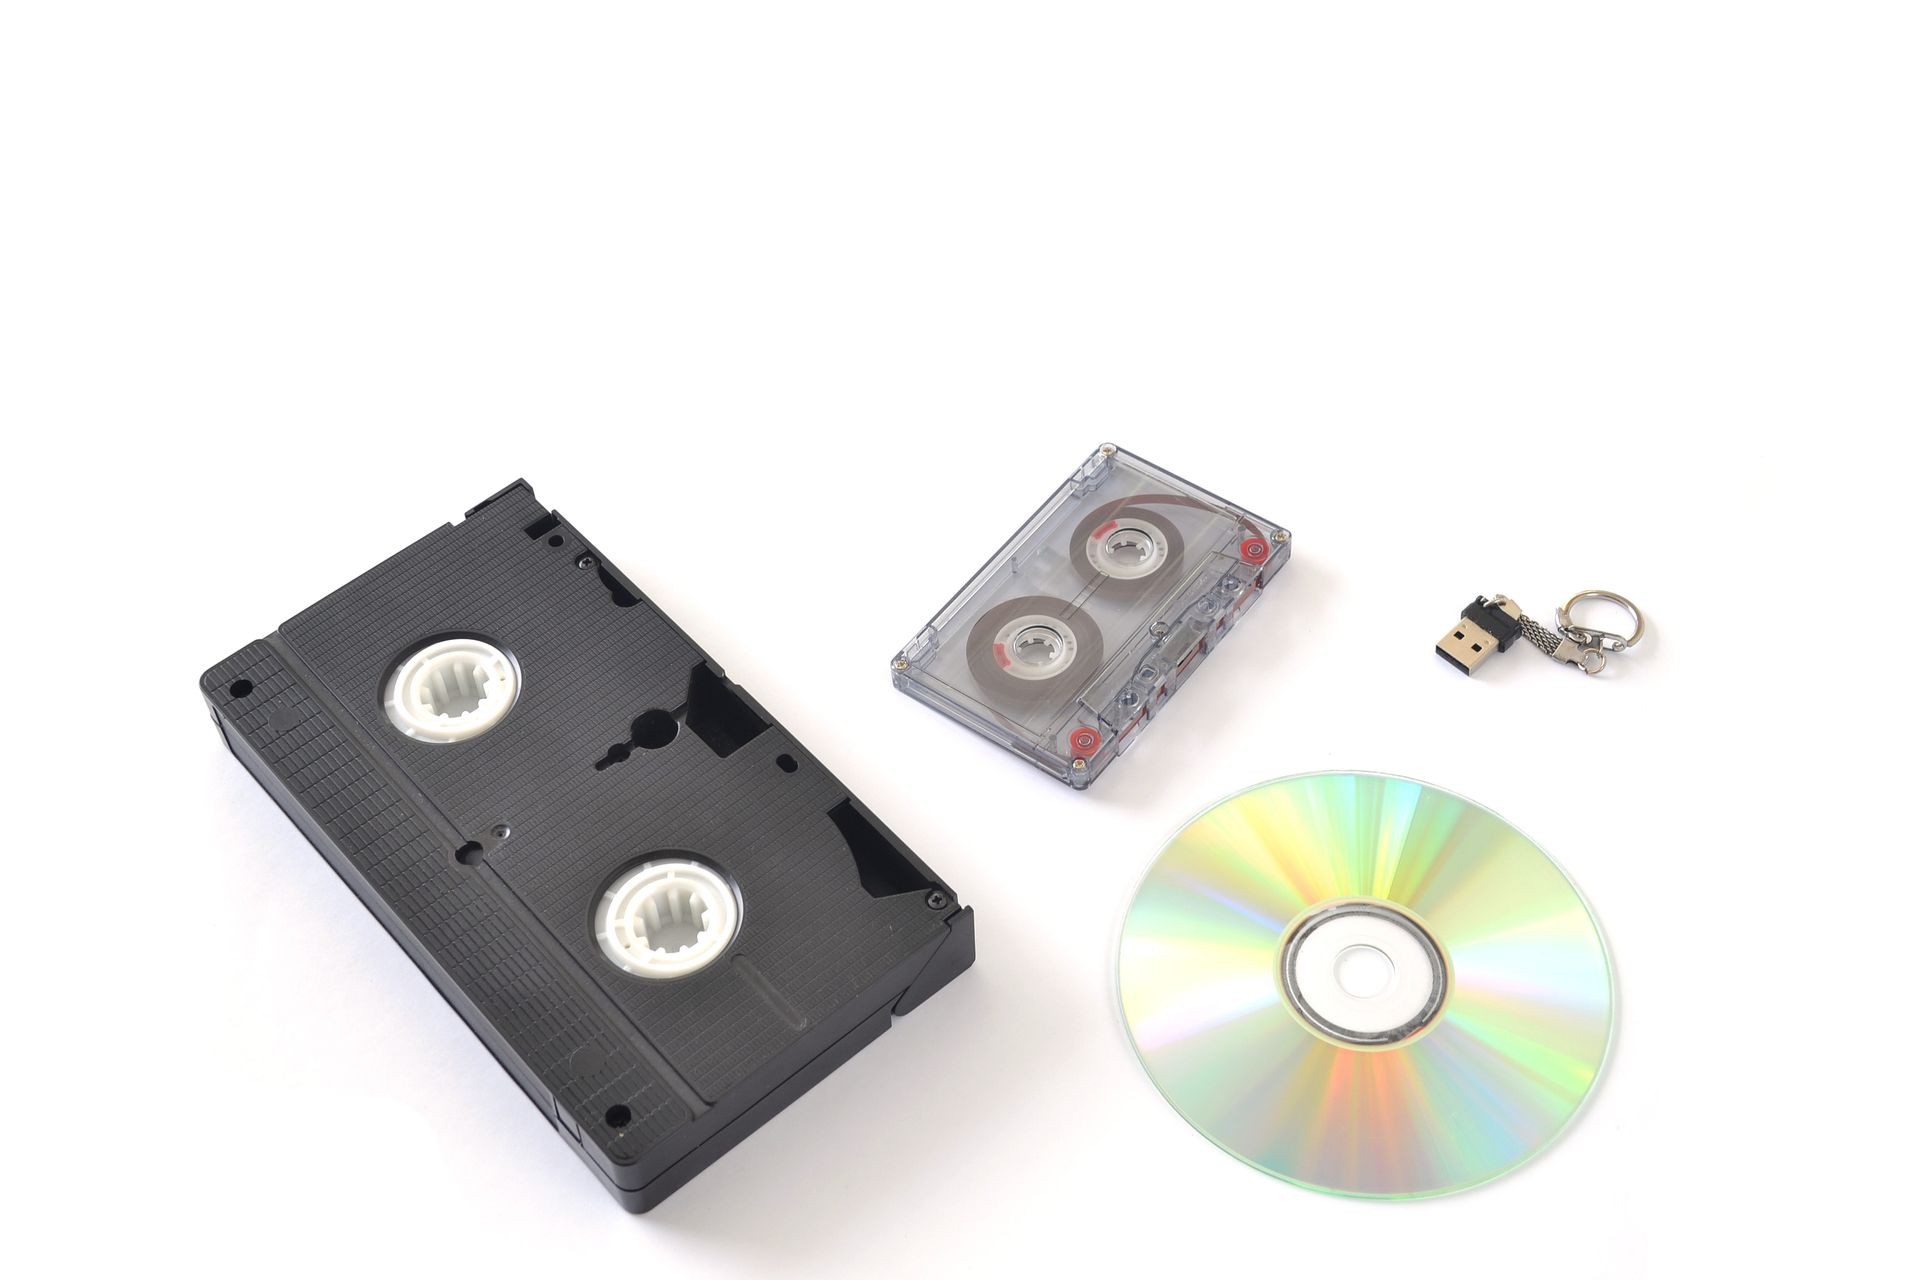 Audio cassette, video cassette, CD and flash memory on a white background.